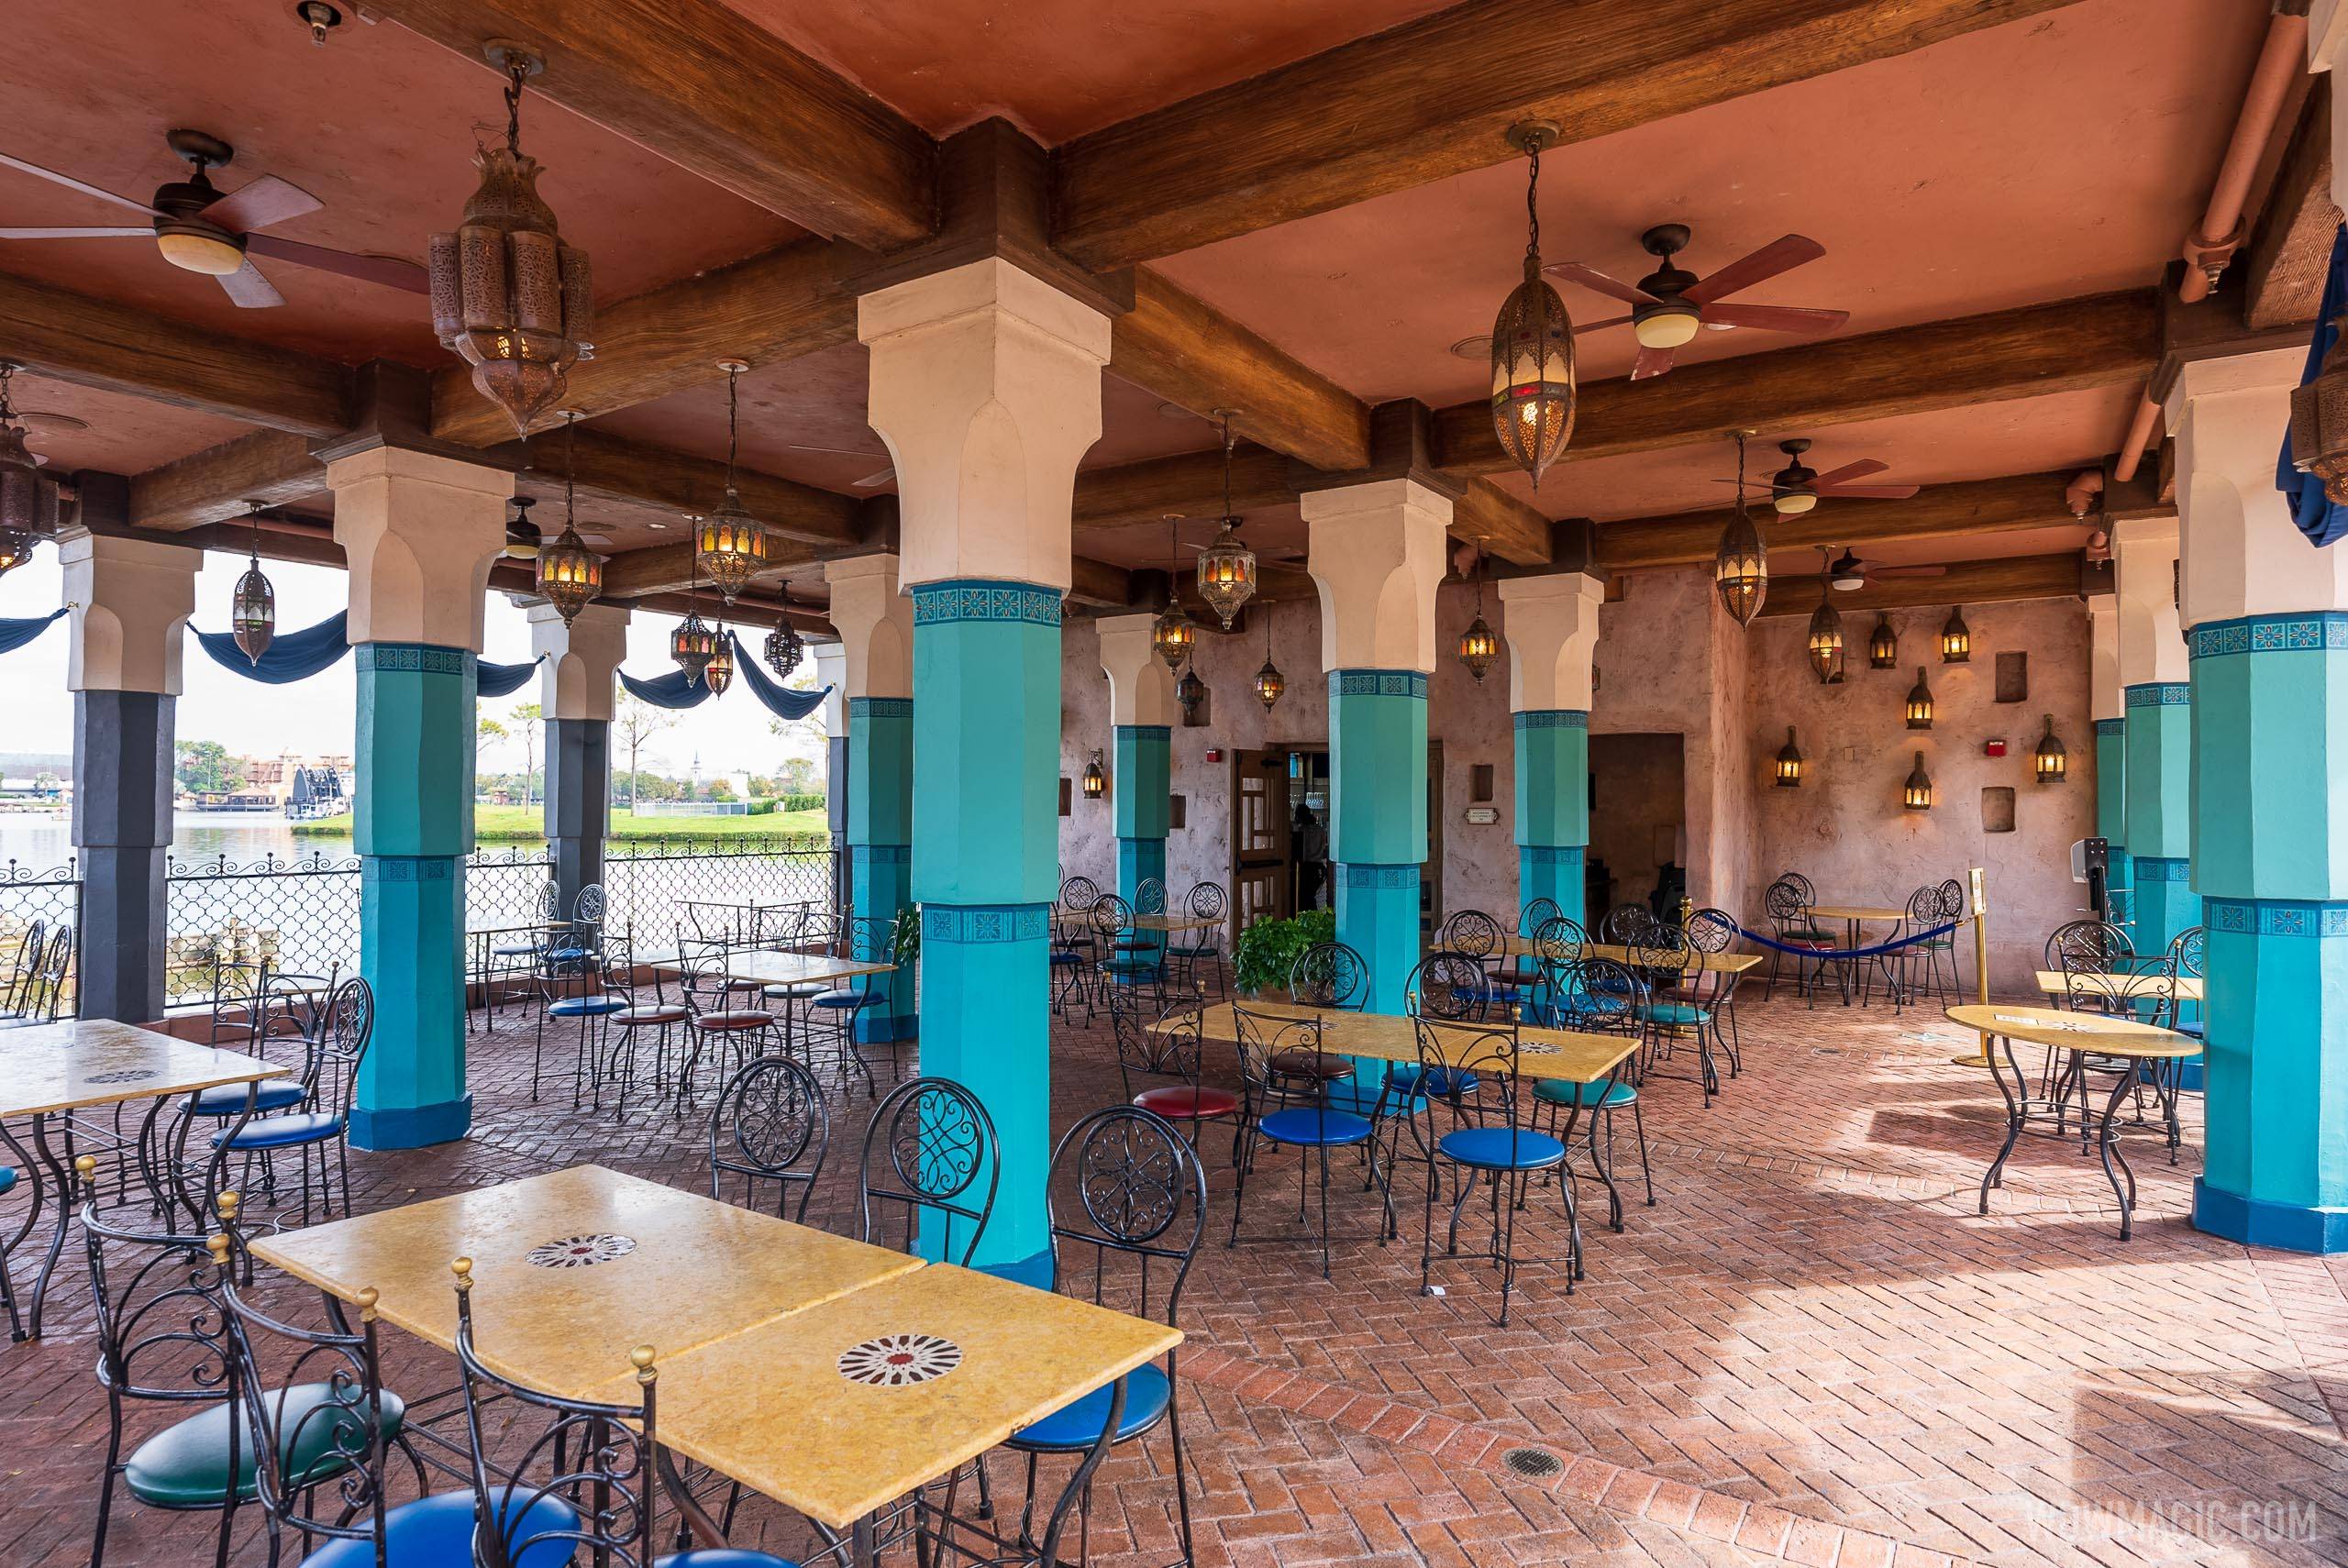 Spice Road Table at EPCOT